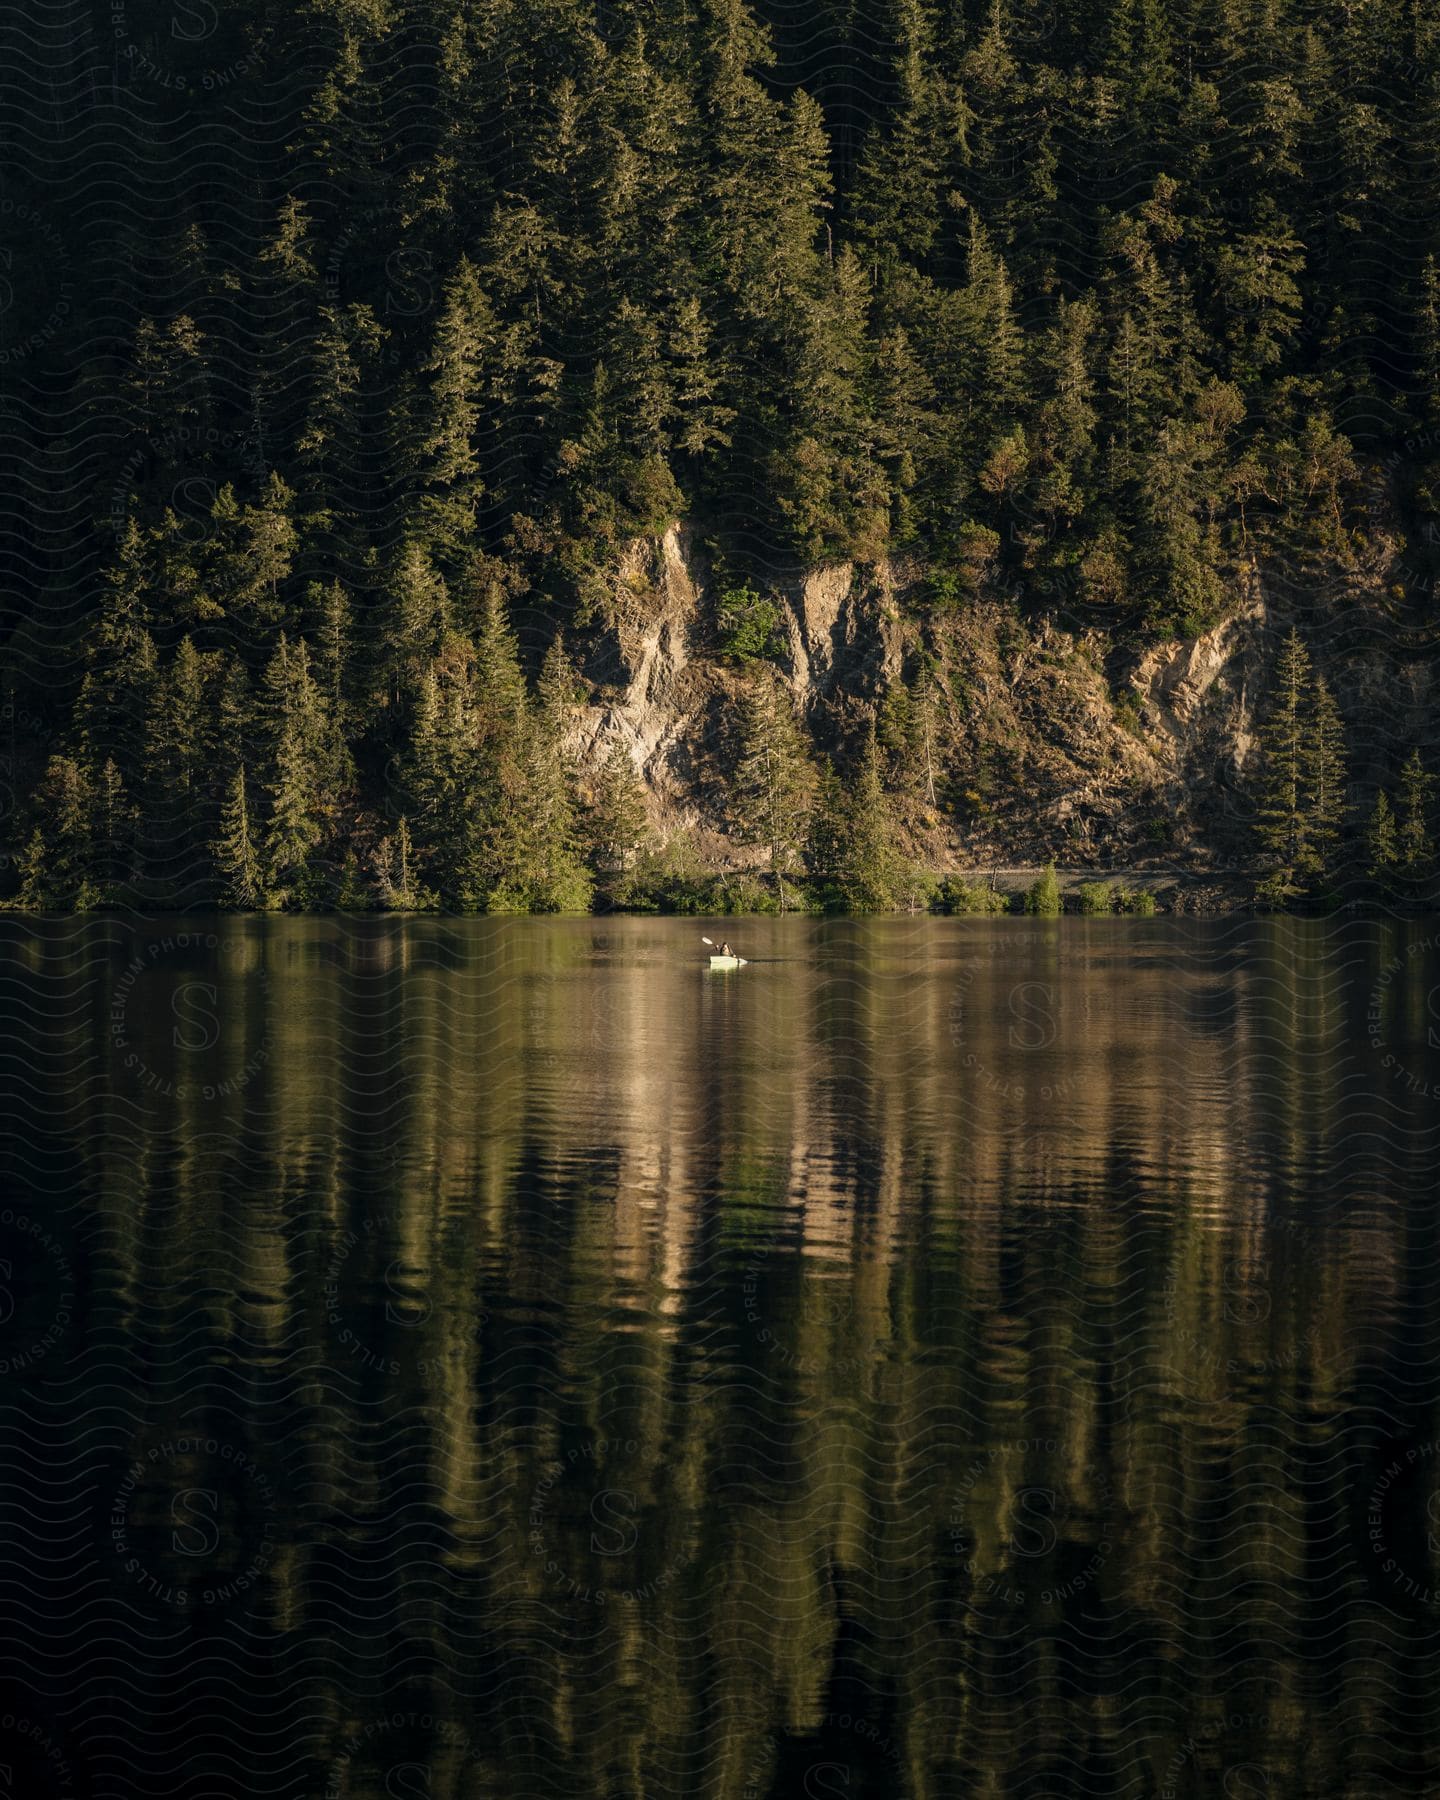 A person in a canoe paddling on a lake towards a forest cliff face.